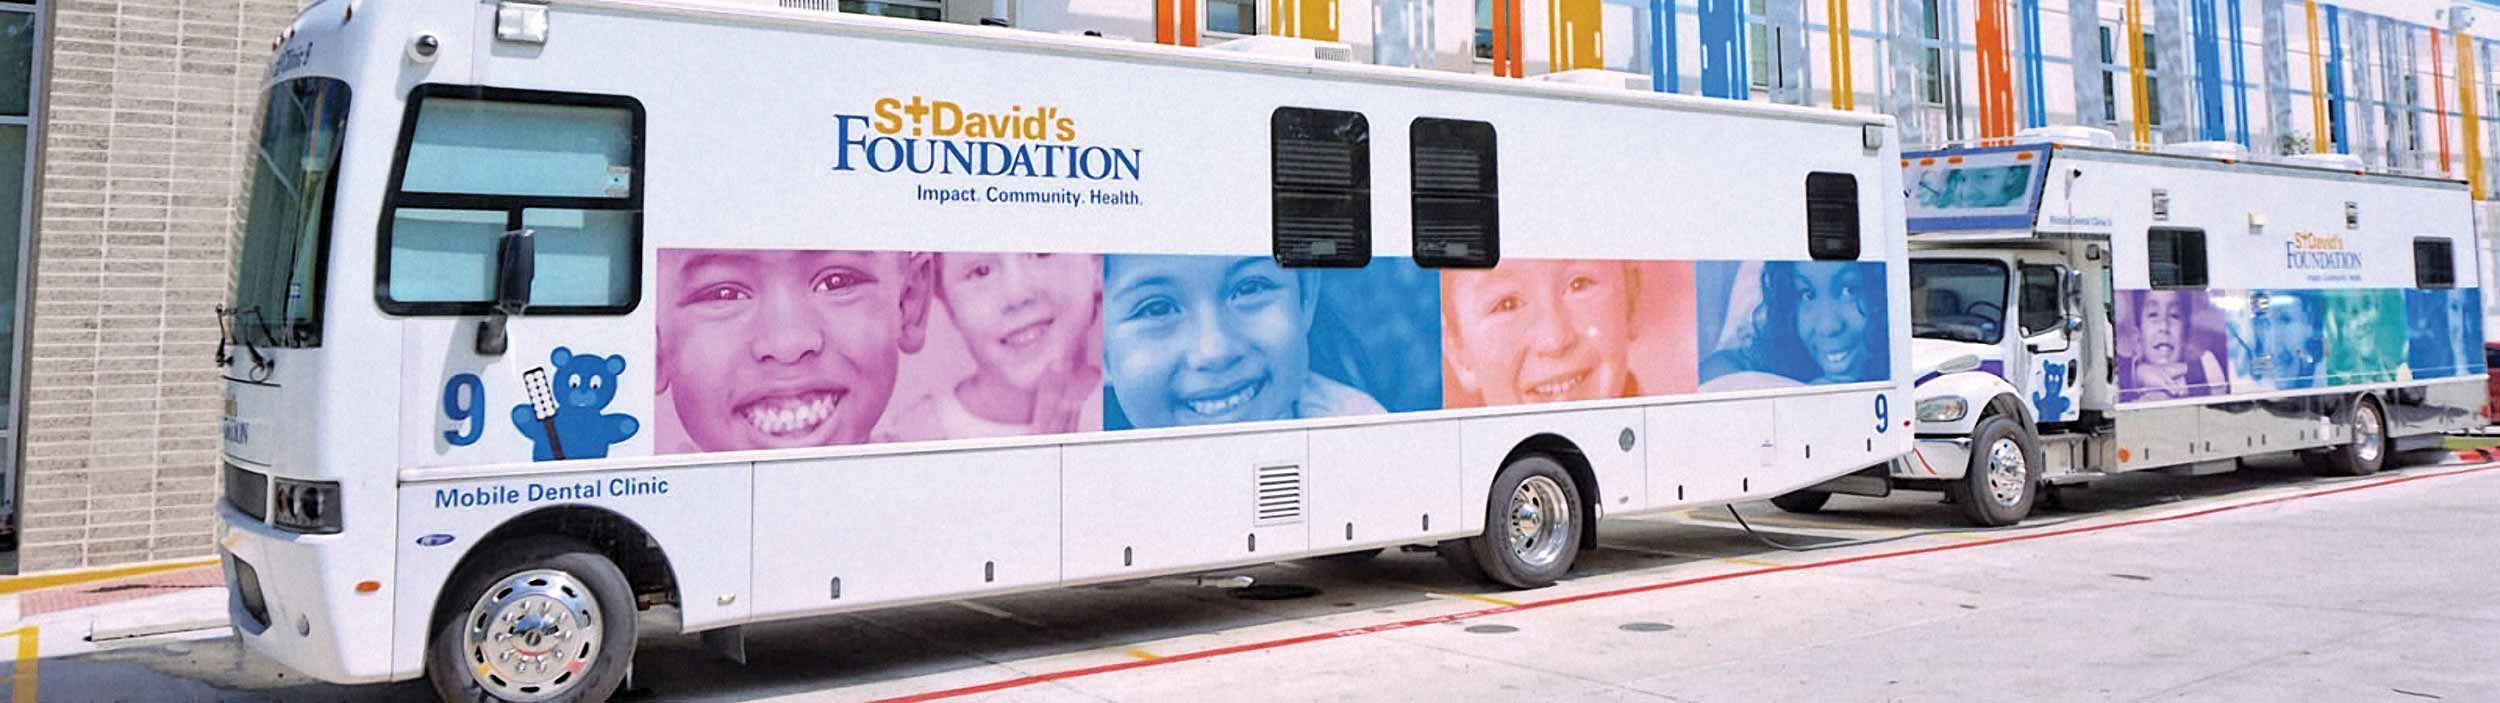 Buses for St. David's Foundation, one of the largest school-based mobile dental programs in the U.S., are lined up along a building to offer free dental care to kids. The buses are white with colorful duotone images of smiling children from all races and ages.